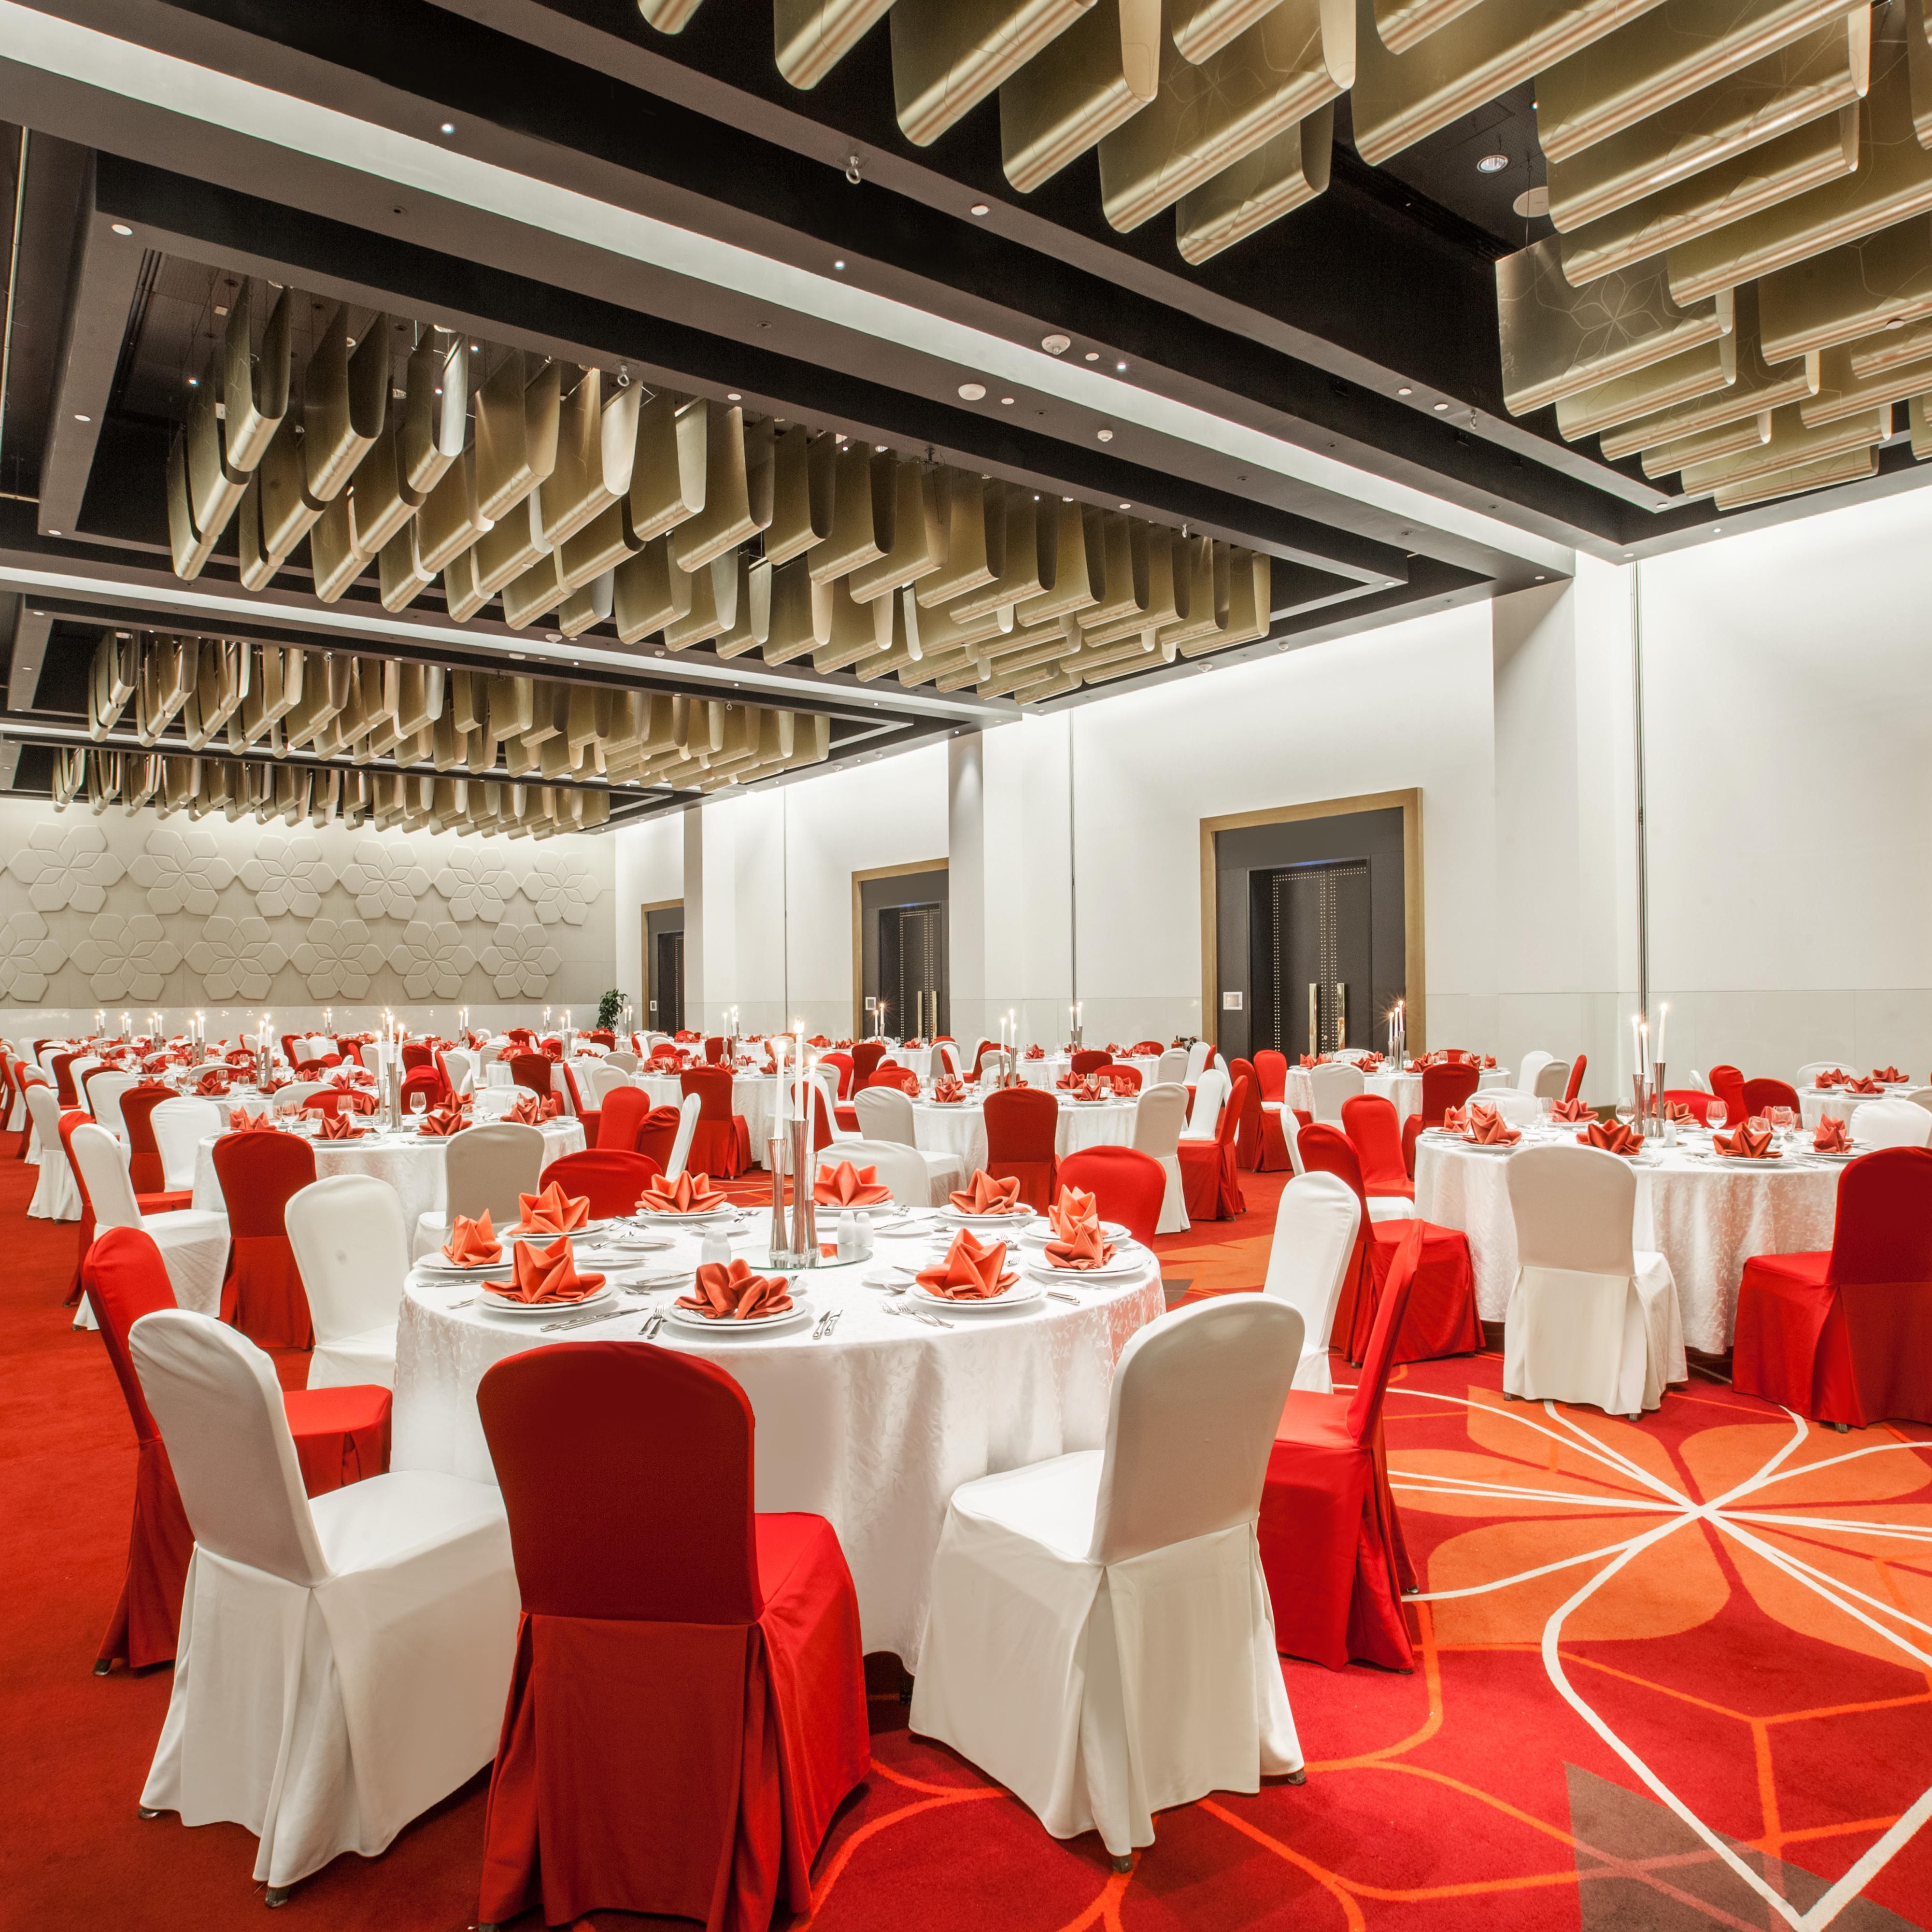 Spacious ballroom for all kinds of events